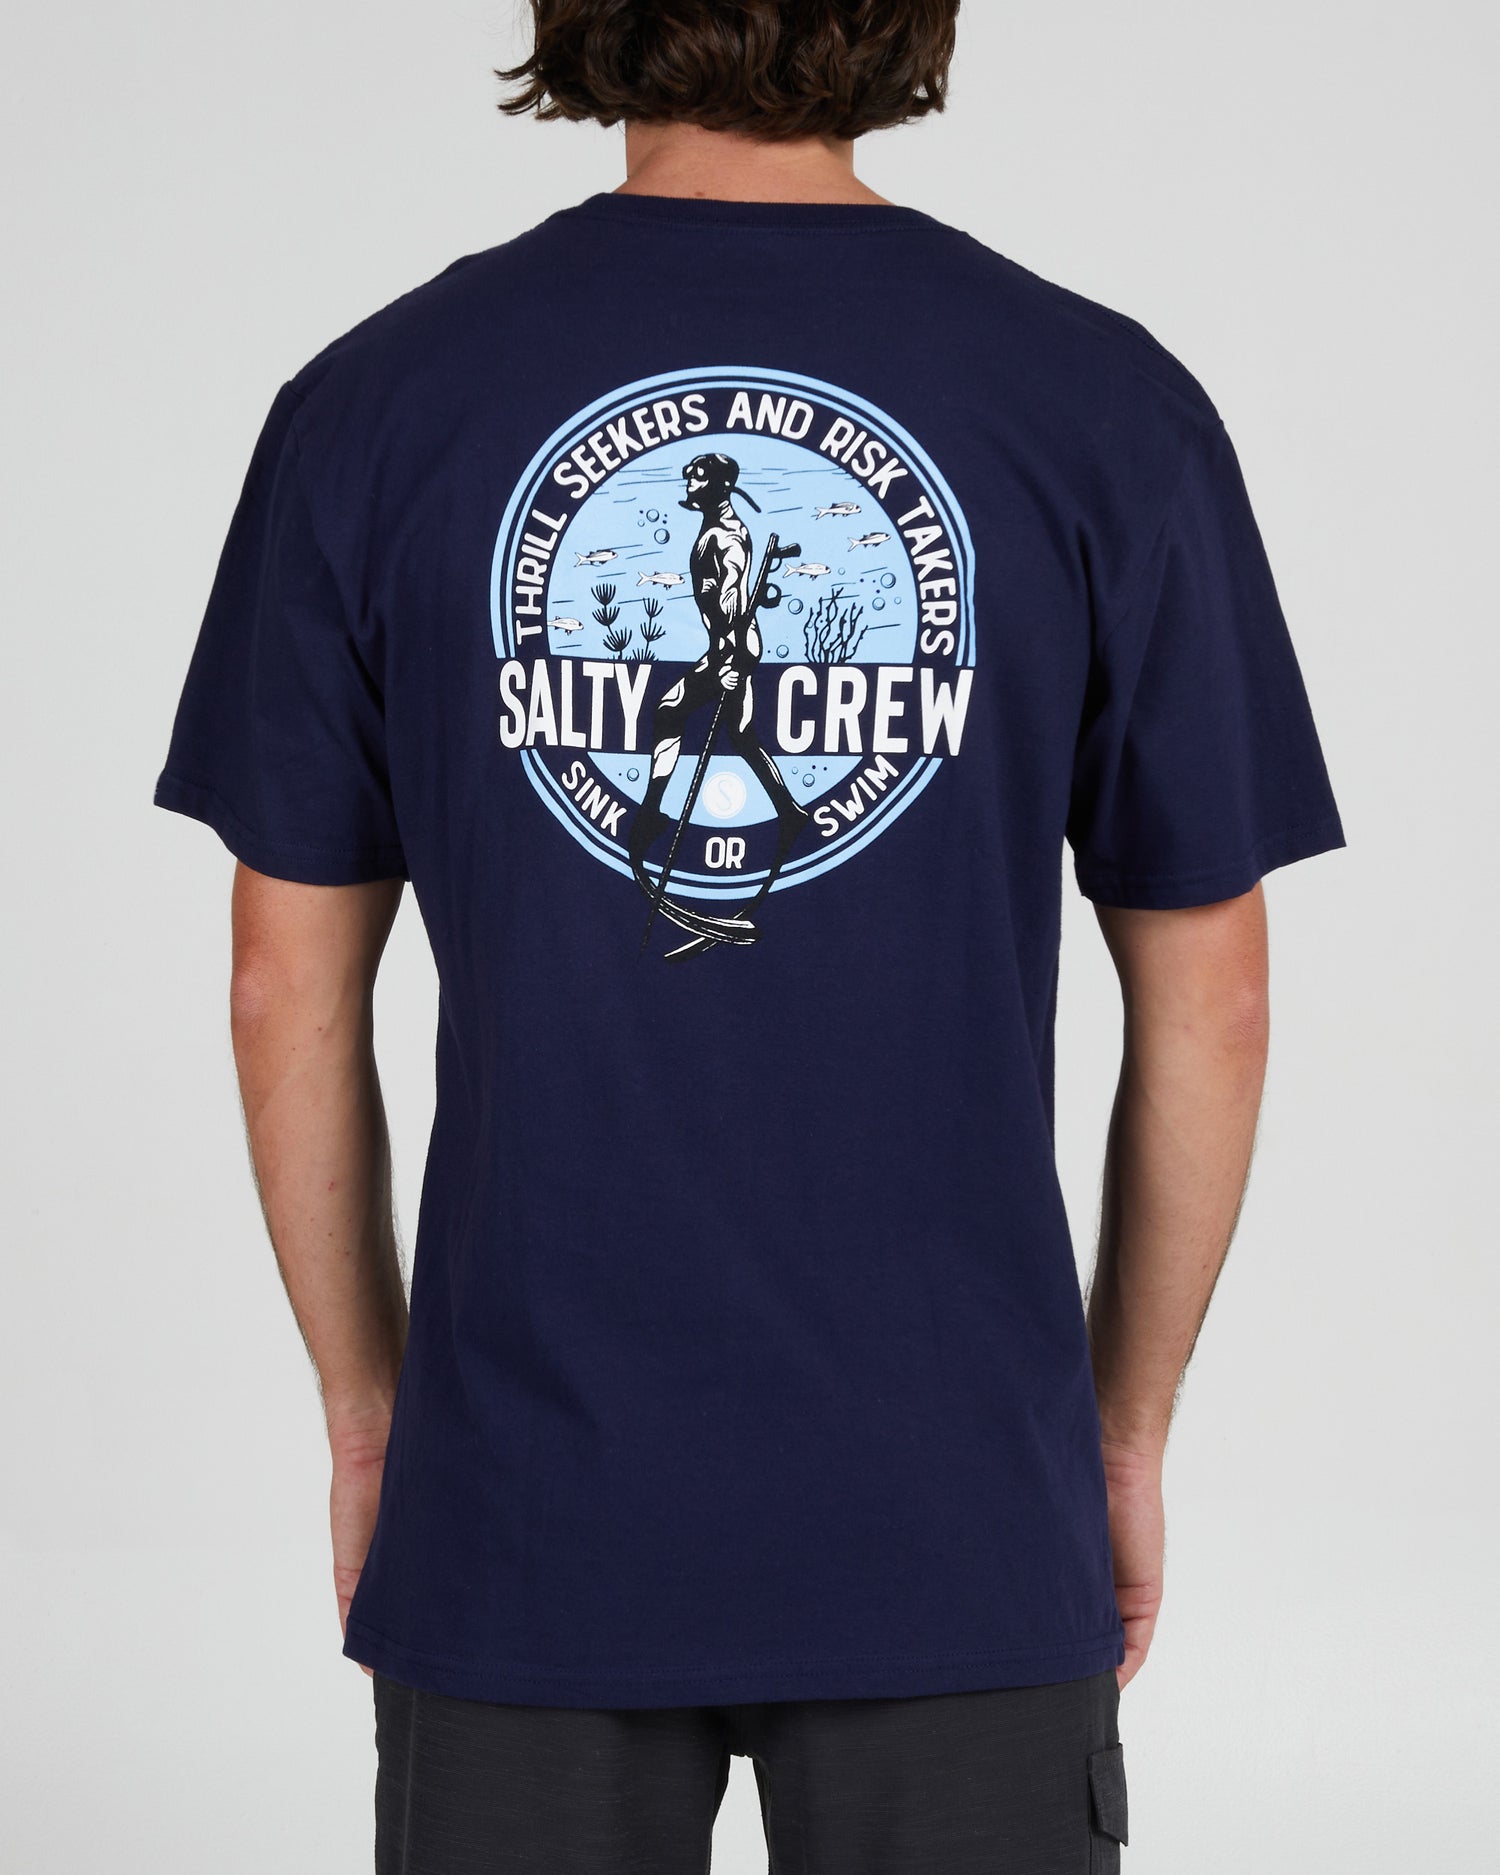 On body back of the Dive Bar Navy S/S Standard Tee